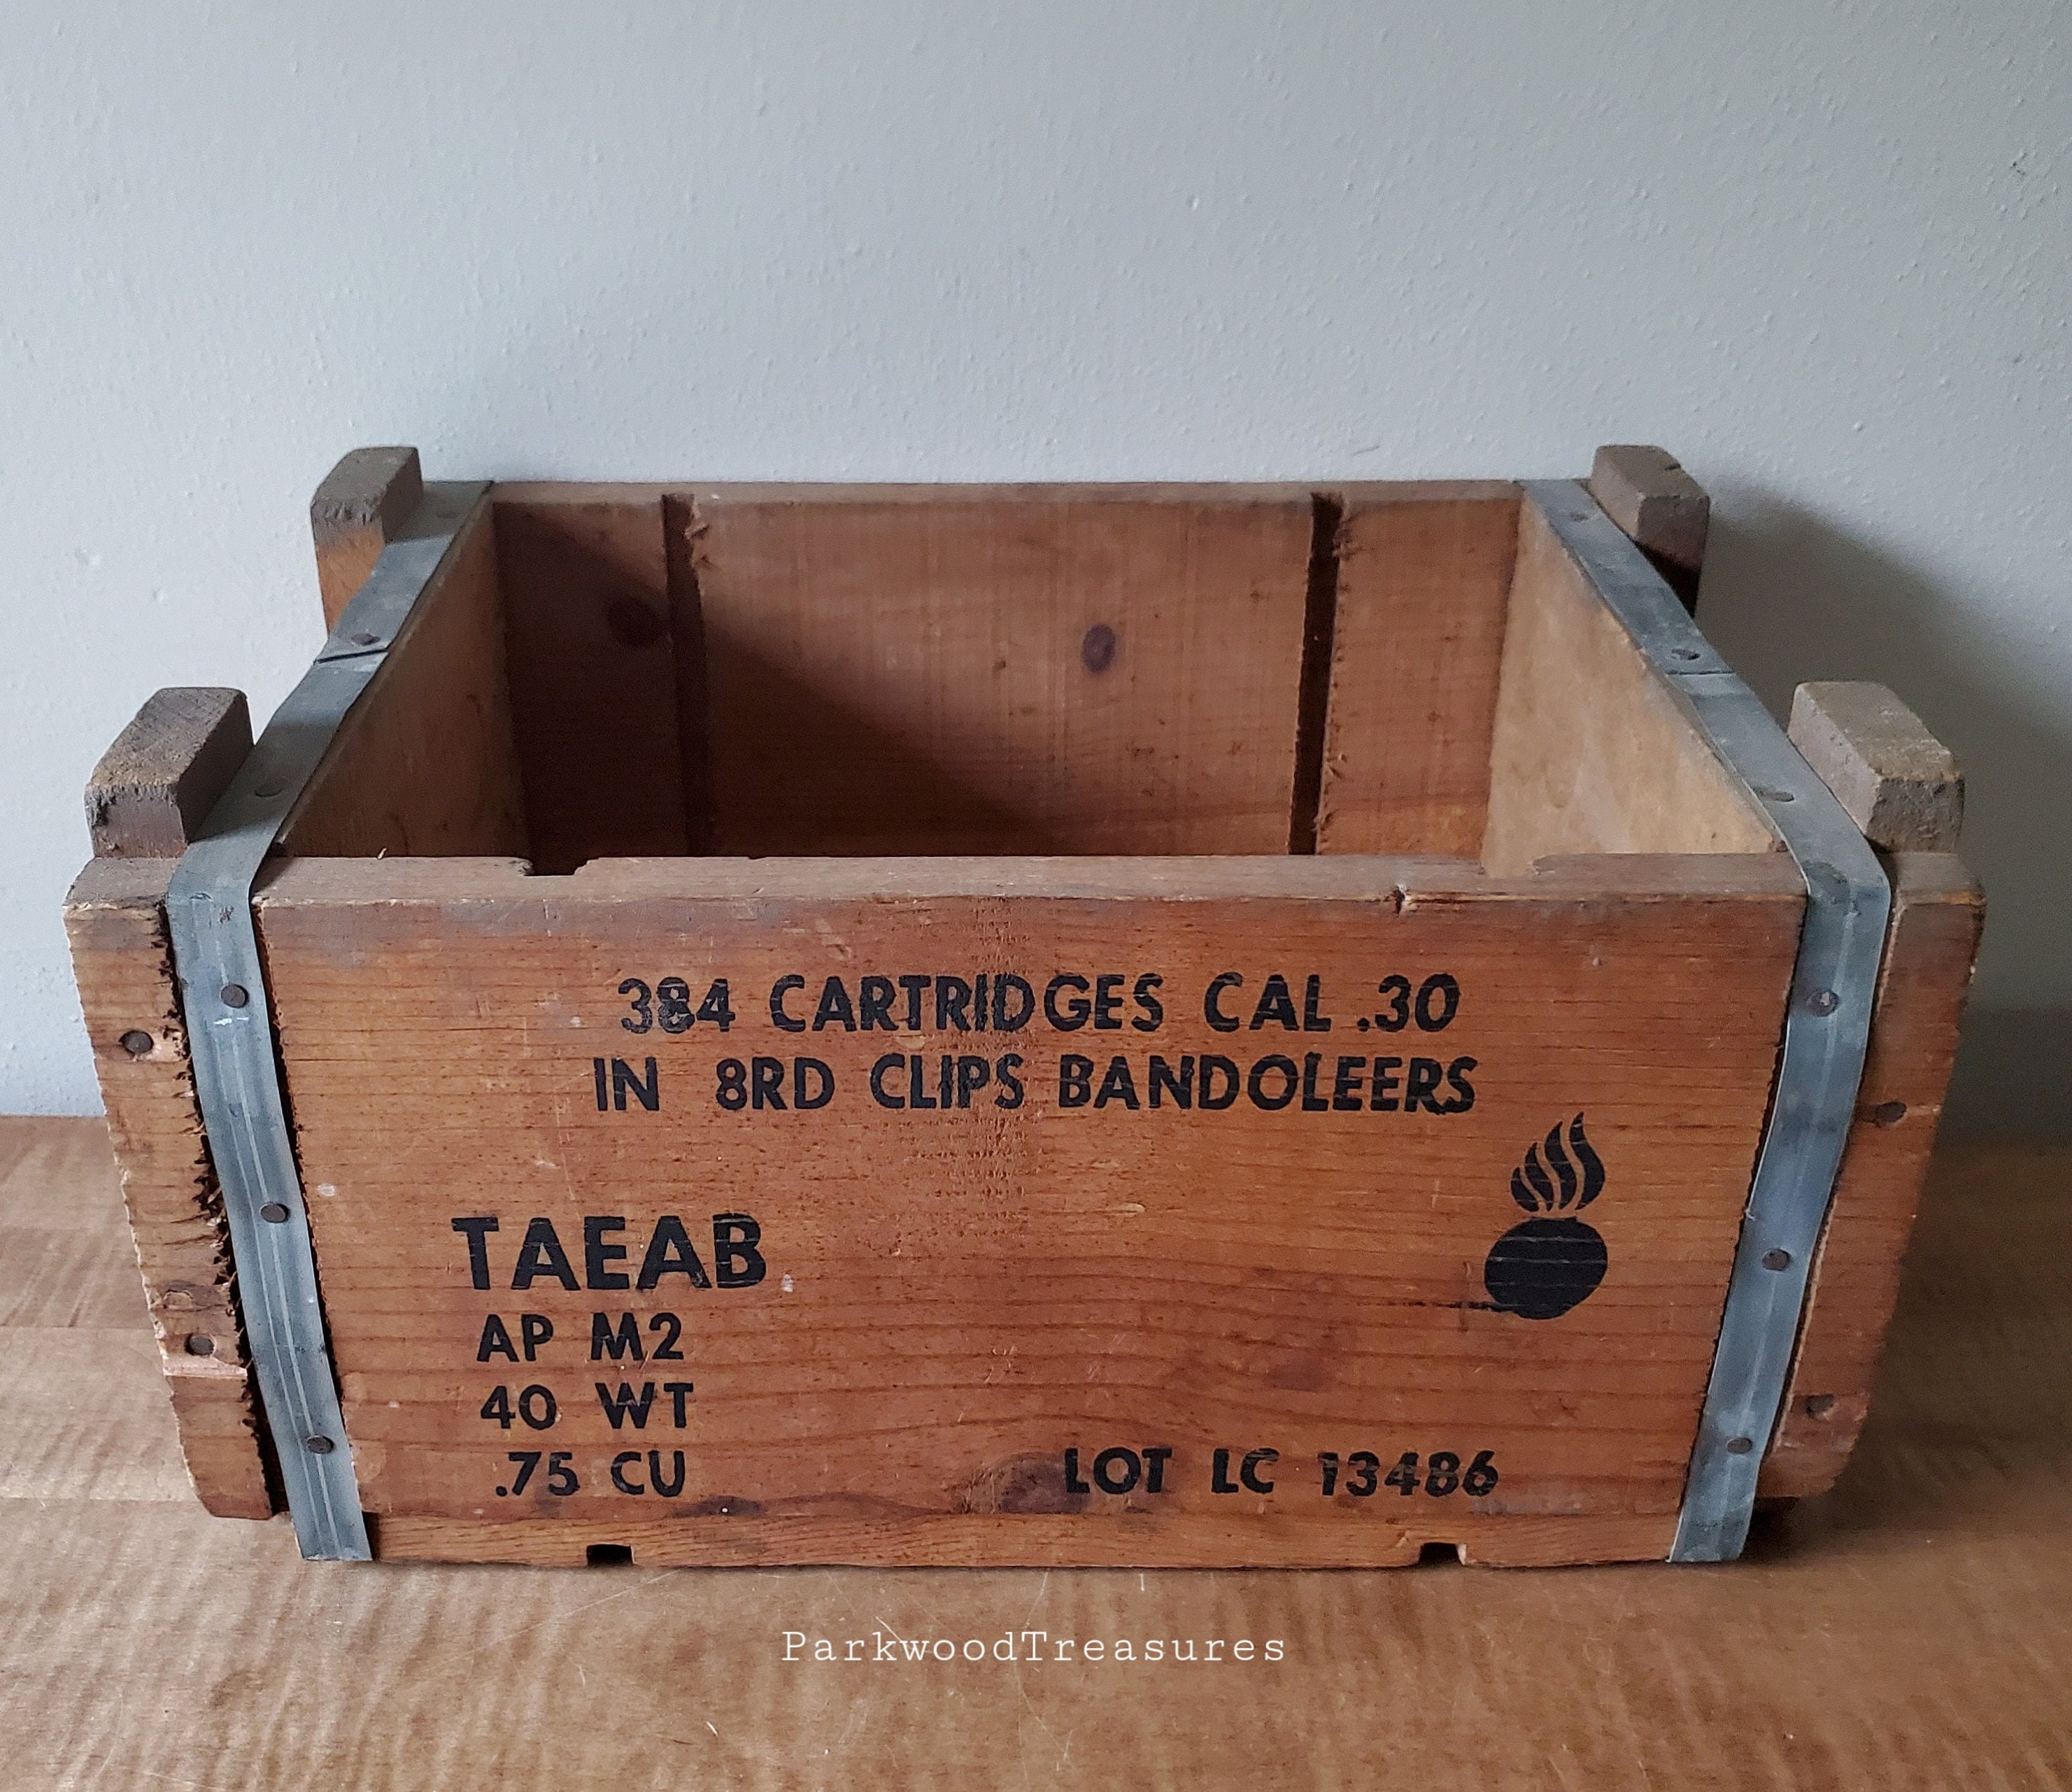 Ammo Boxes for Personalization – Thames Street Laserworks